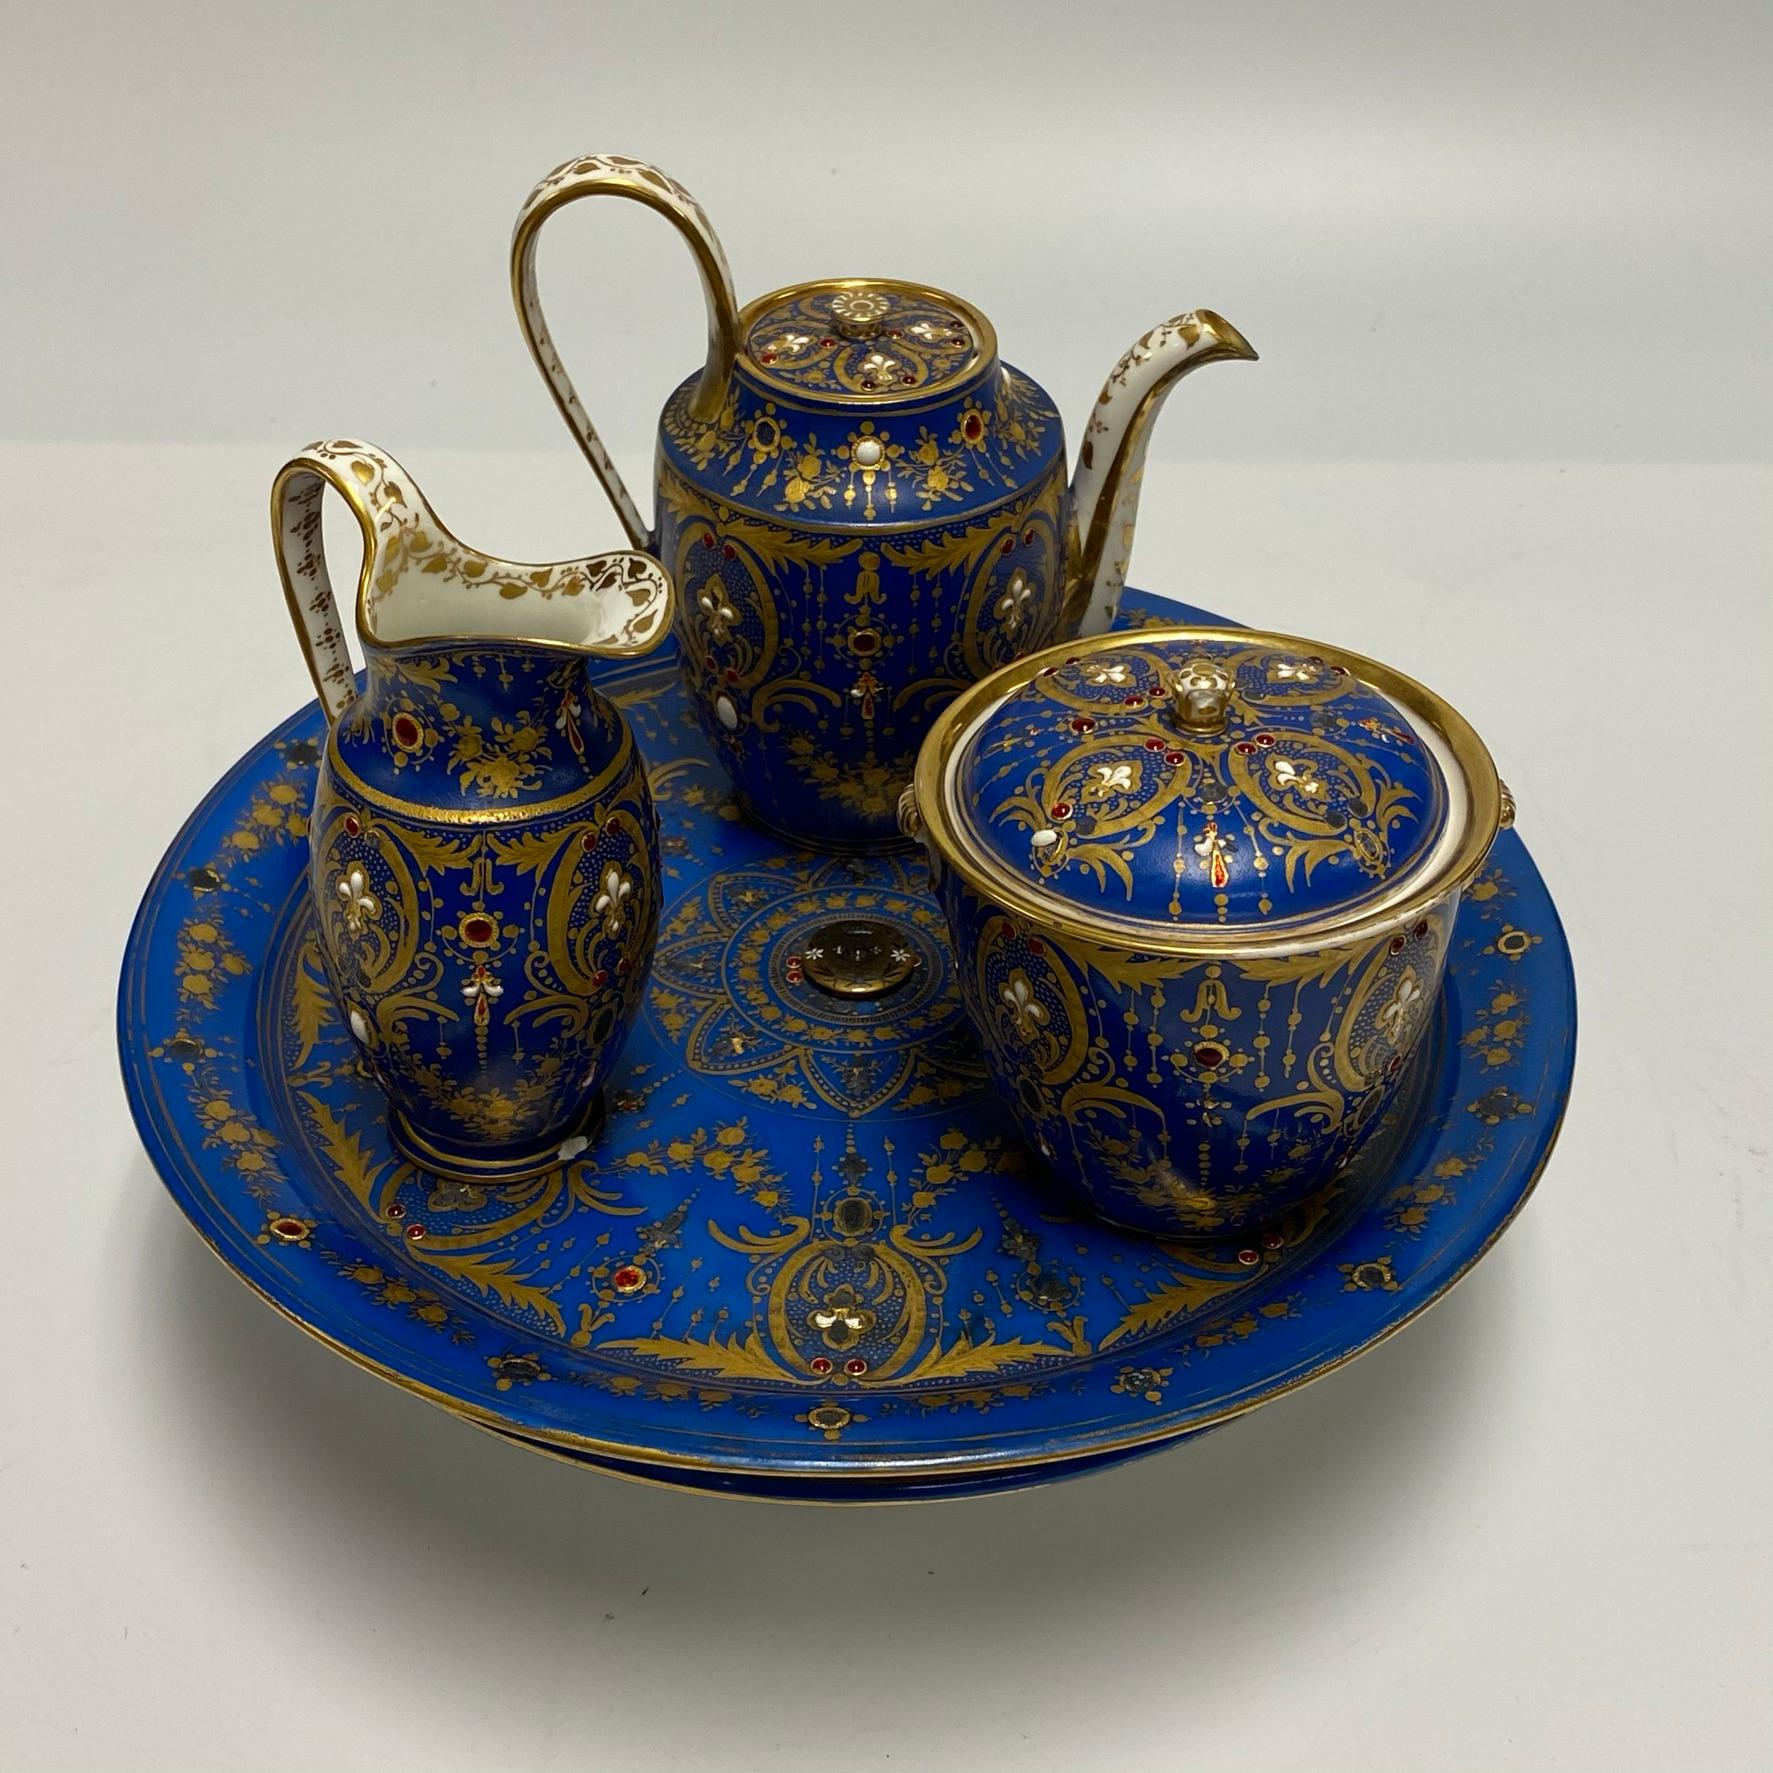 Very fine and unusual French 19 century Sevres jeweled porcelain tea service consisting of 
A tazza, sugar, creamer and tea pot.
Tazza: 12 7/8 in diameter, 4 in height.
Pot: 6.5 in height.